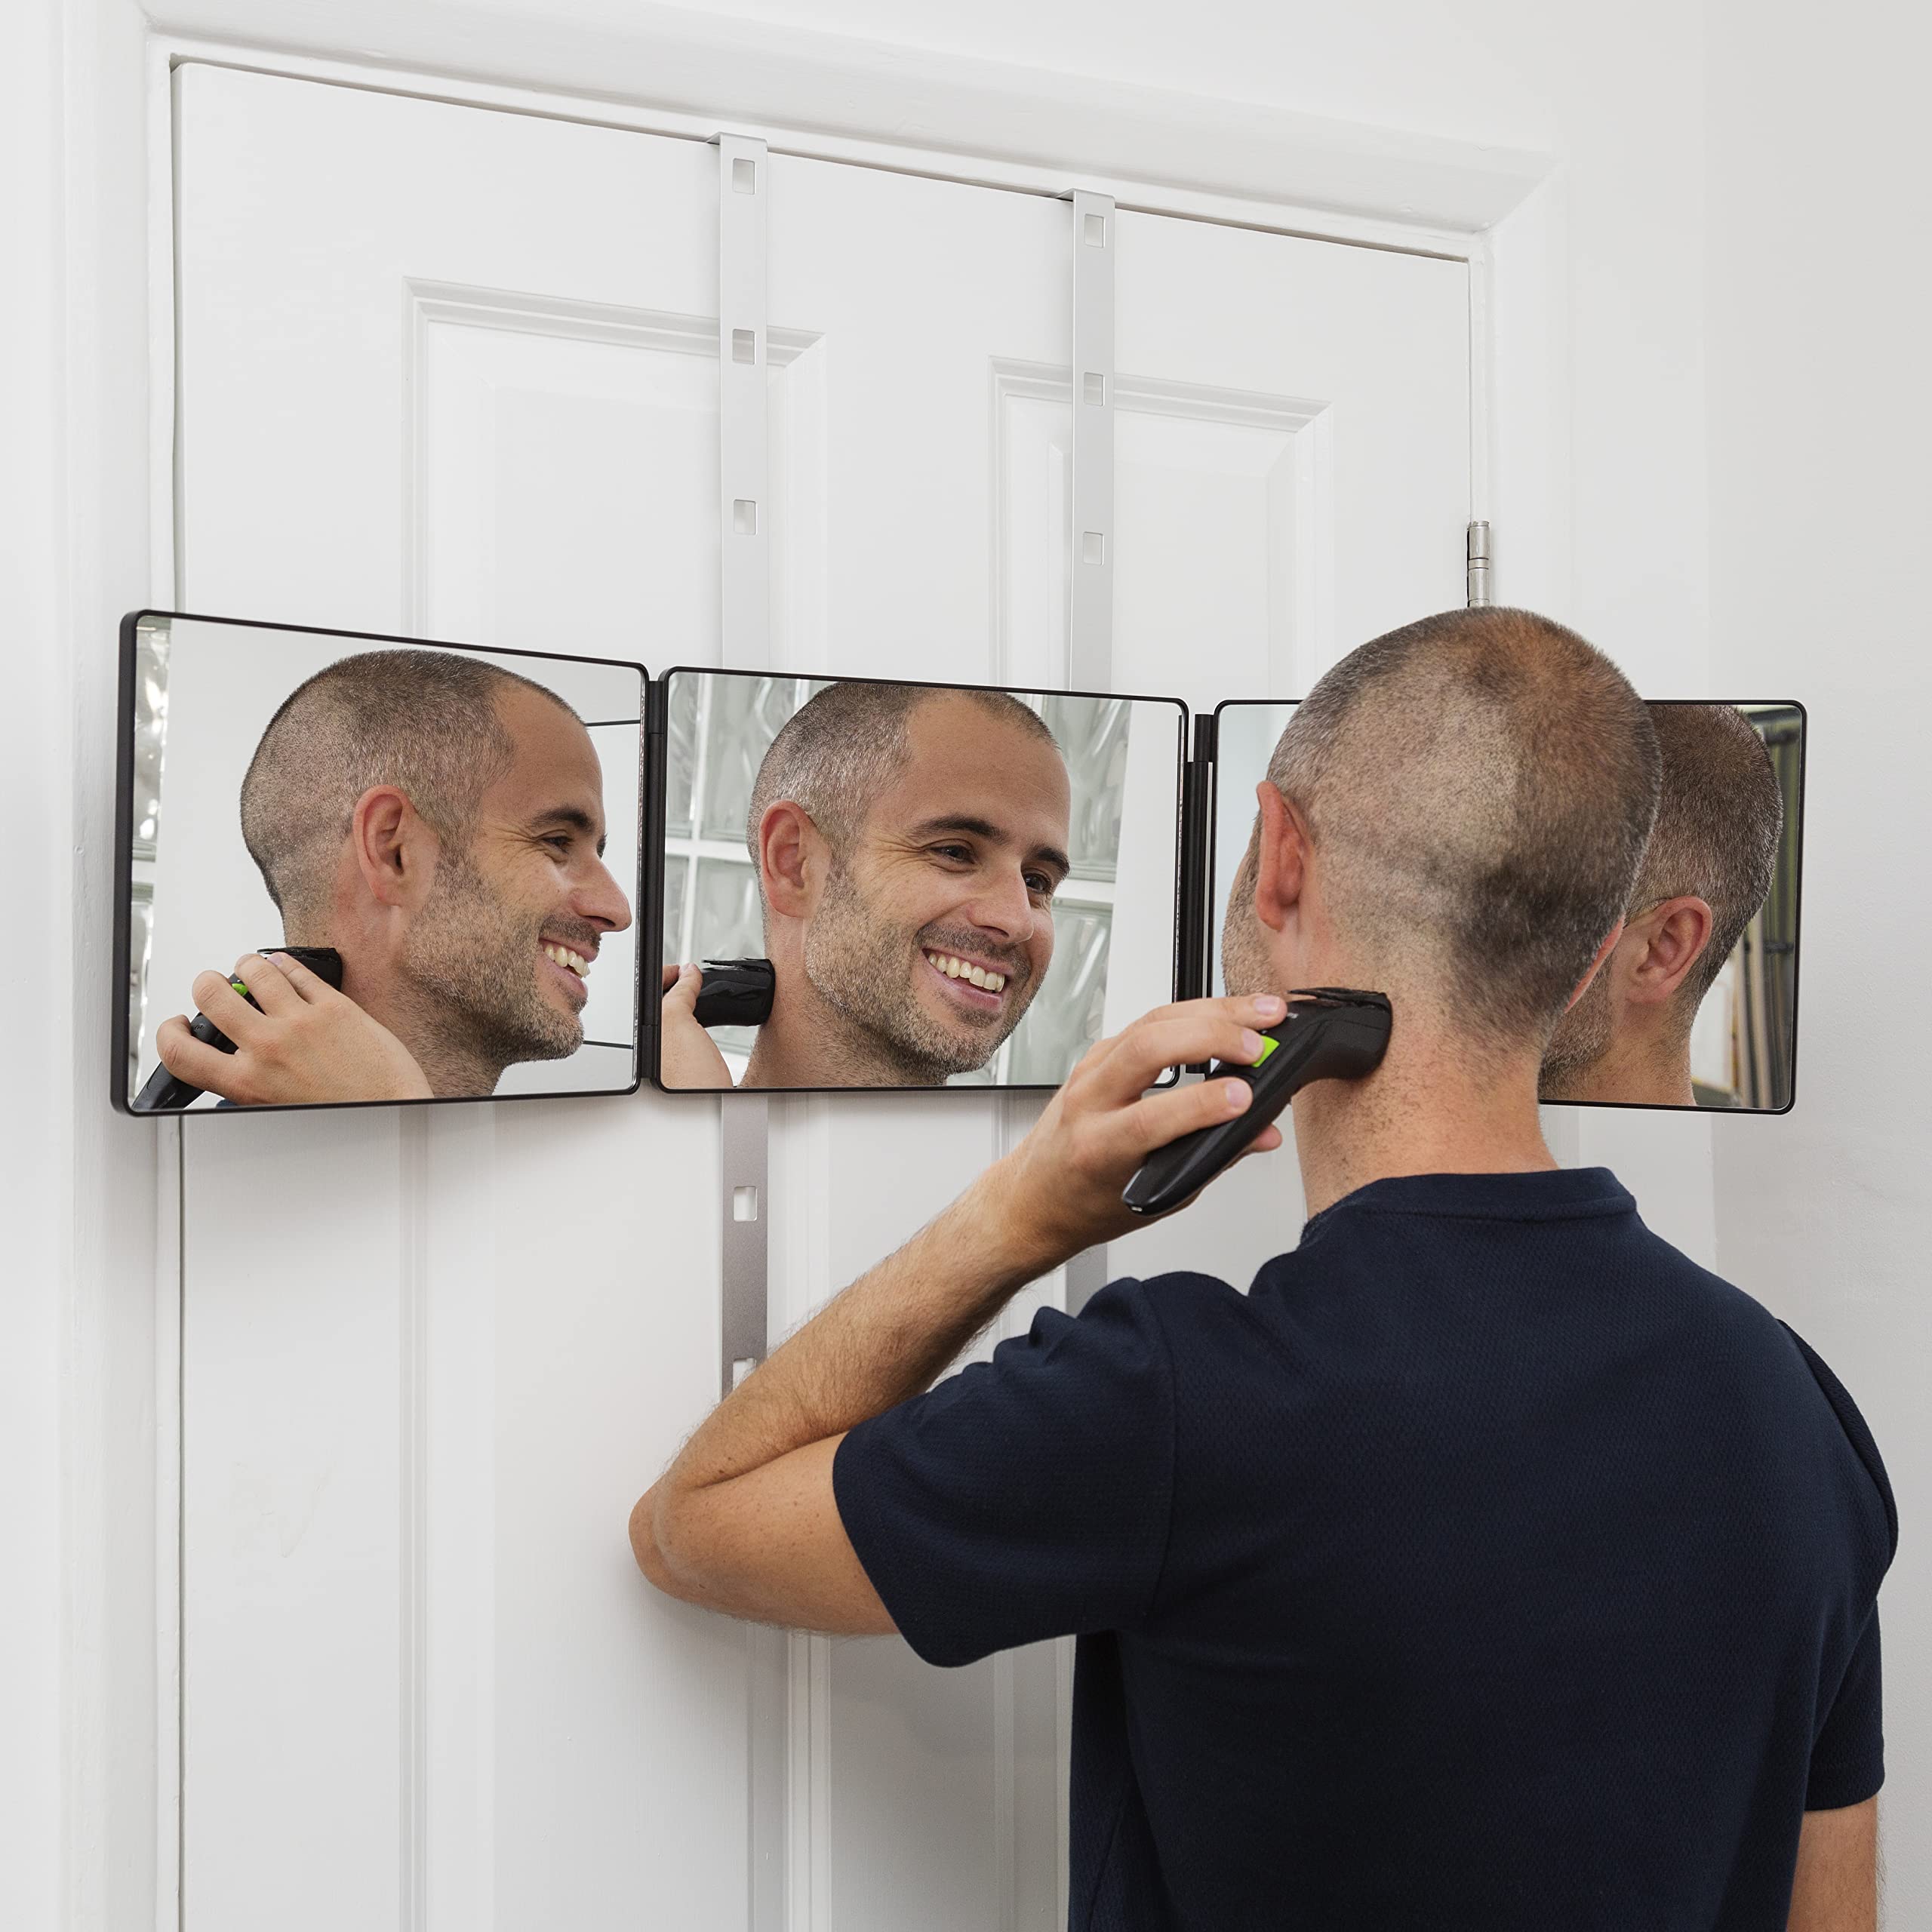 A mirror reflecting an unfinished haircut.